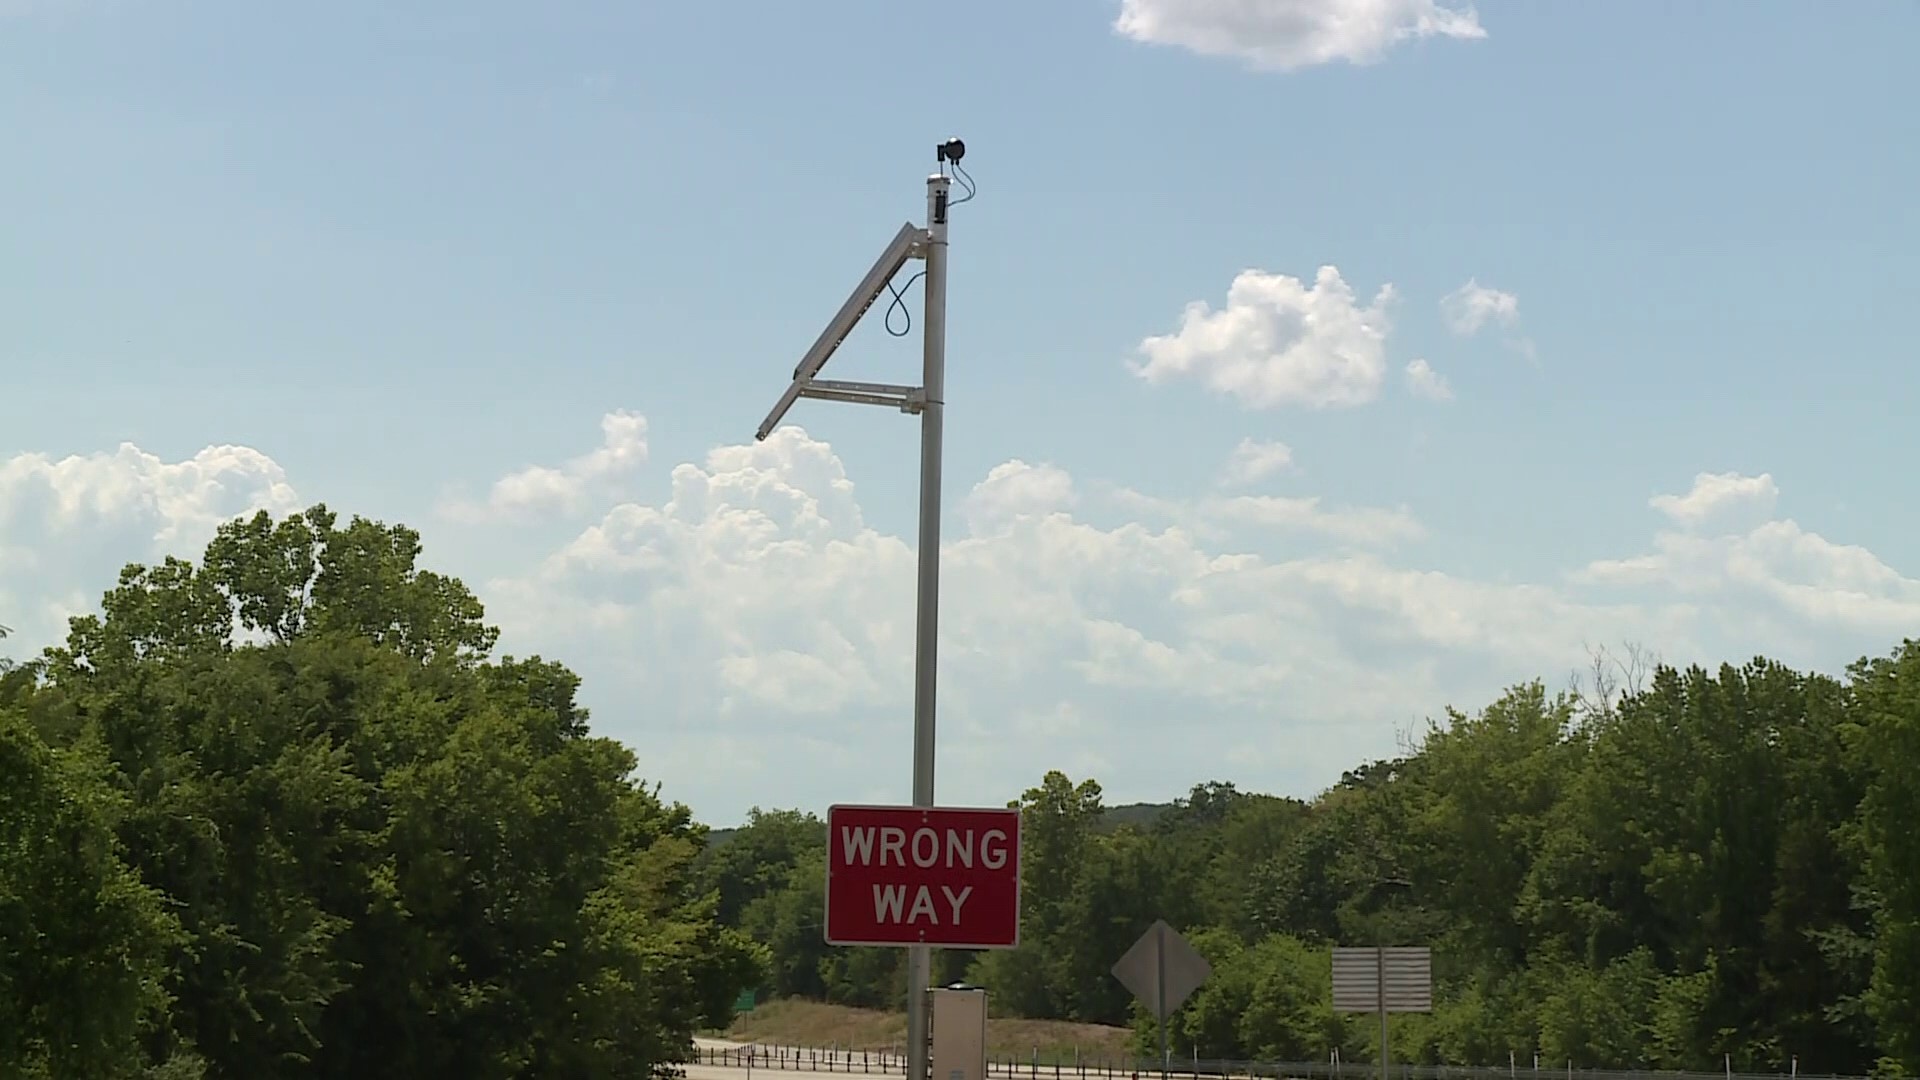 The Oklahoma Department of Transportation is experimenting with infrared cameras to detect motorists who enter the interstate going the wrong way.